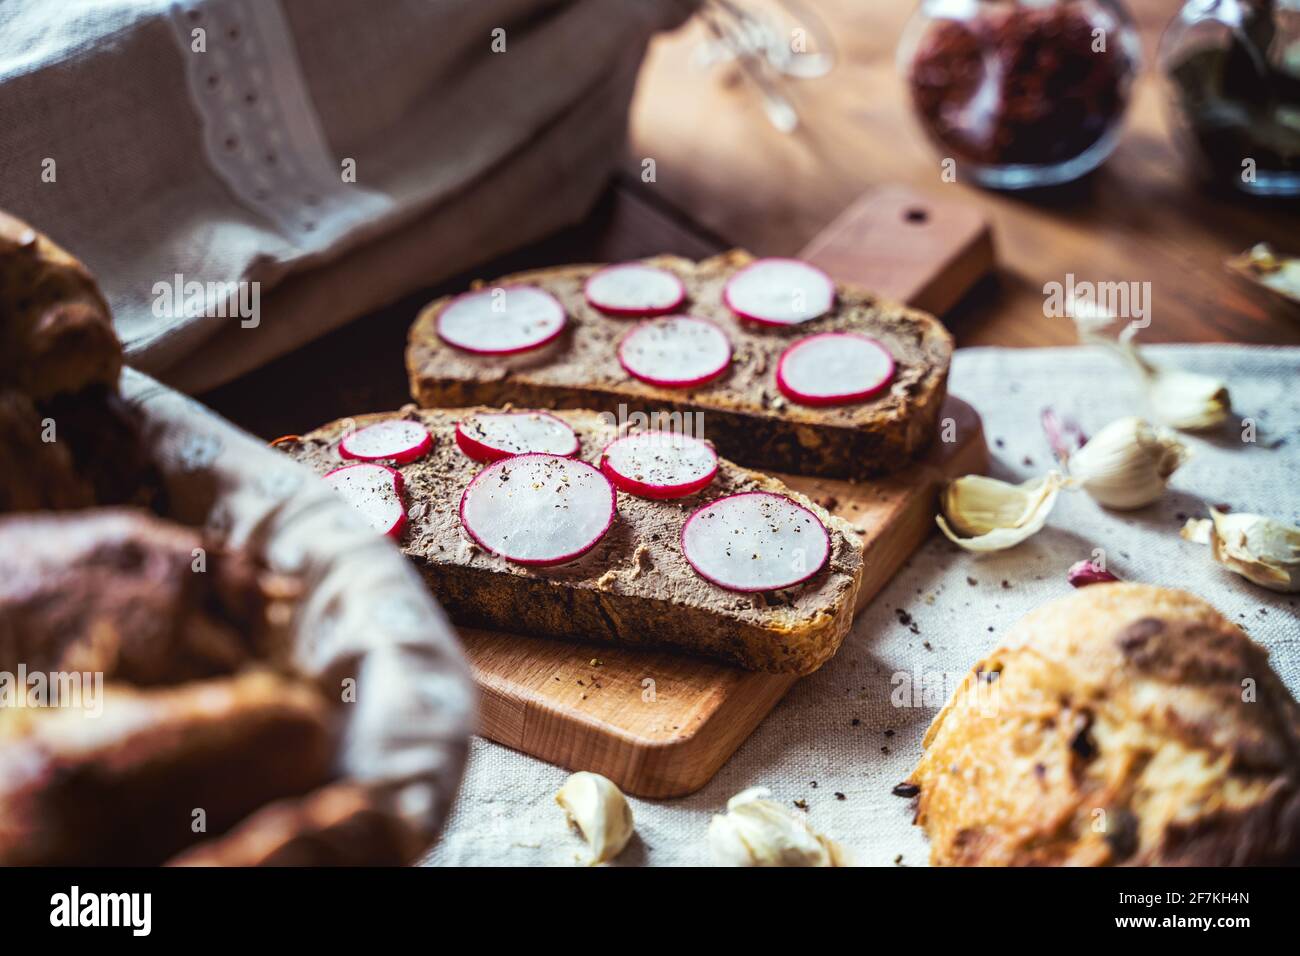 Sliced and plated Sourdough bread. Vegan vegetables on rustic crusty fresh country bread. Stock Photo